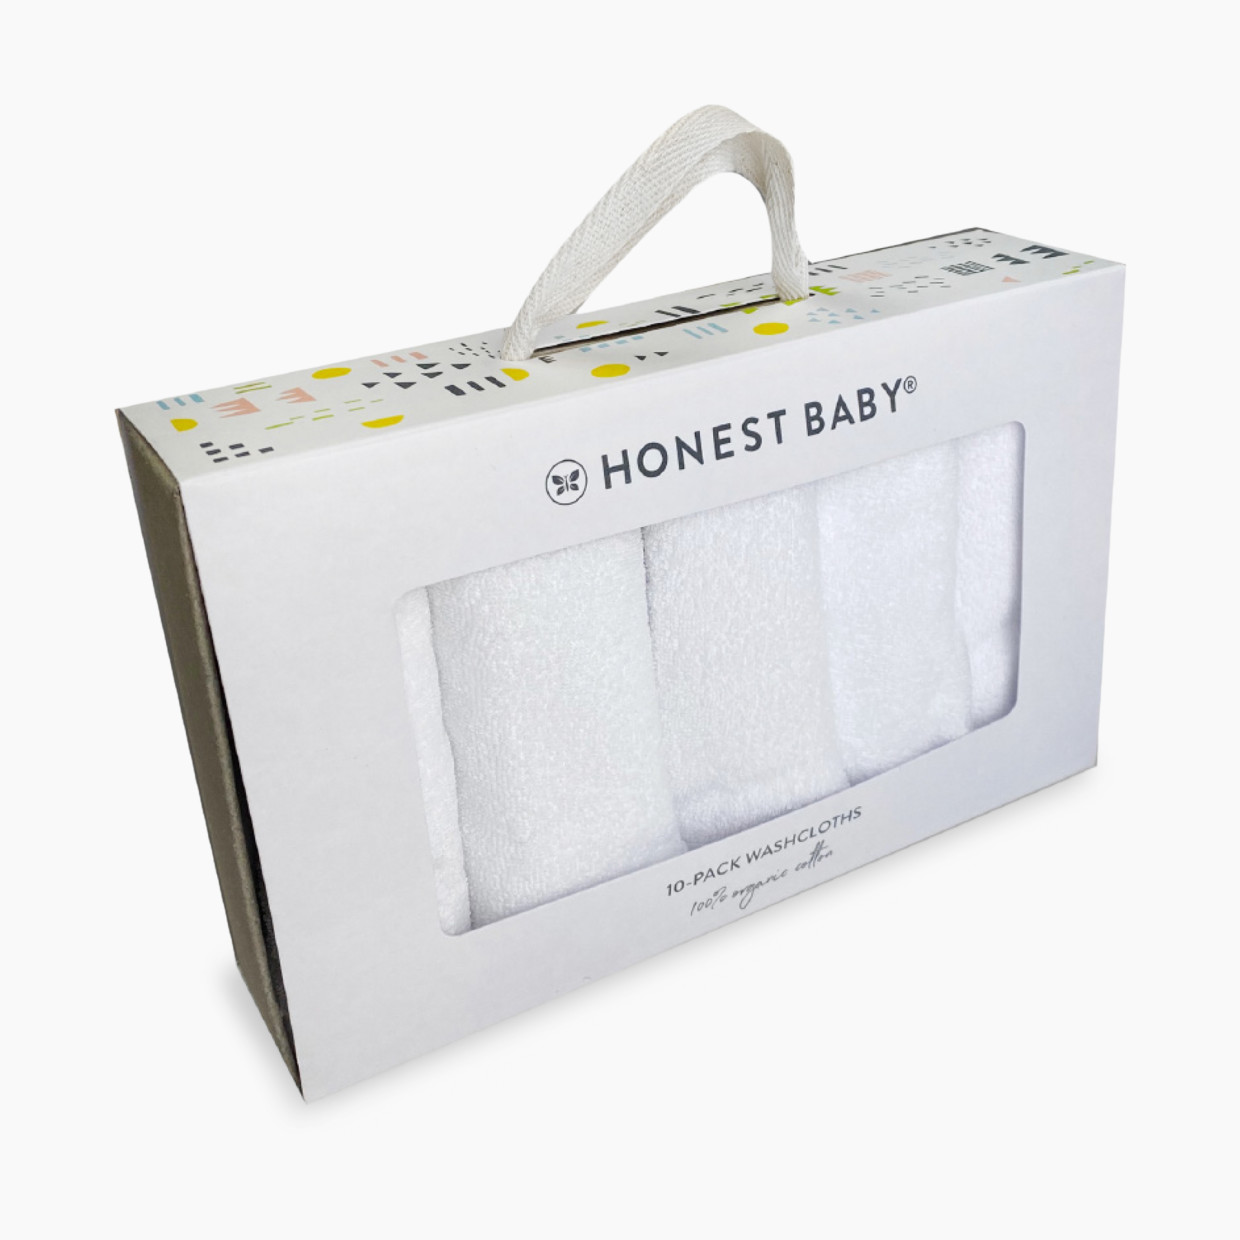 Honest Baby Clothing 10-Pack Organic Cotton Baby Terry Wash Cloths - White, Os.